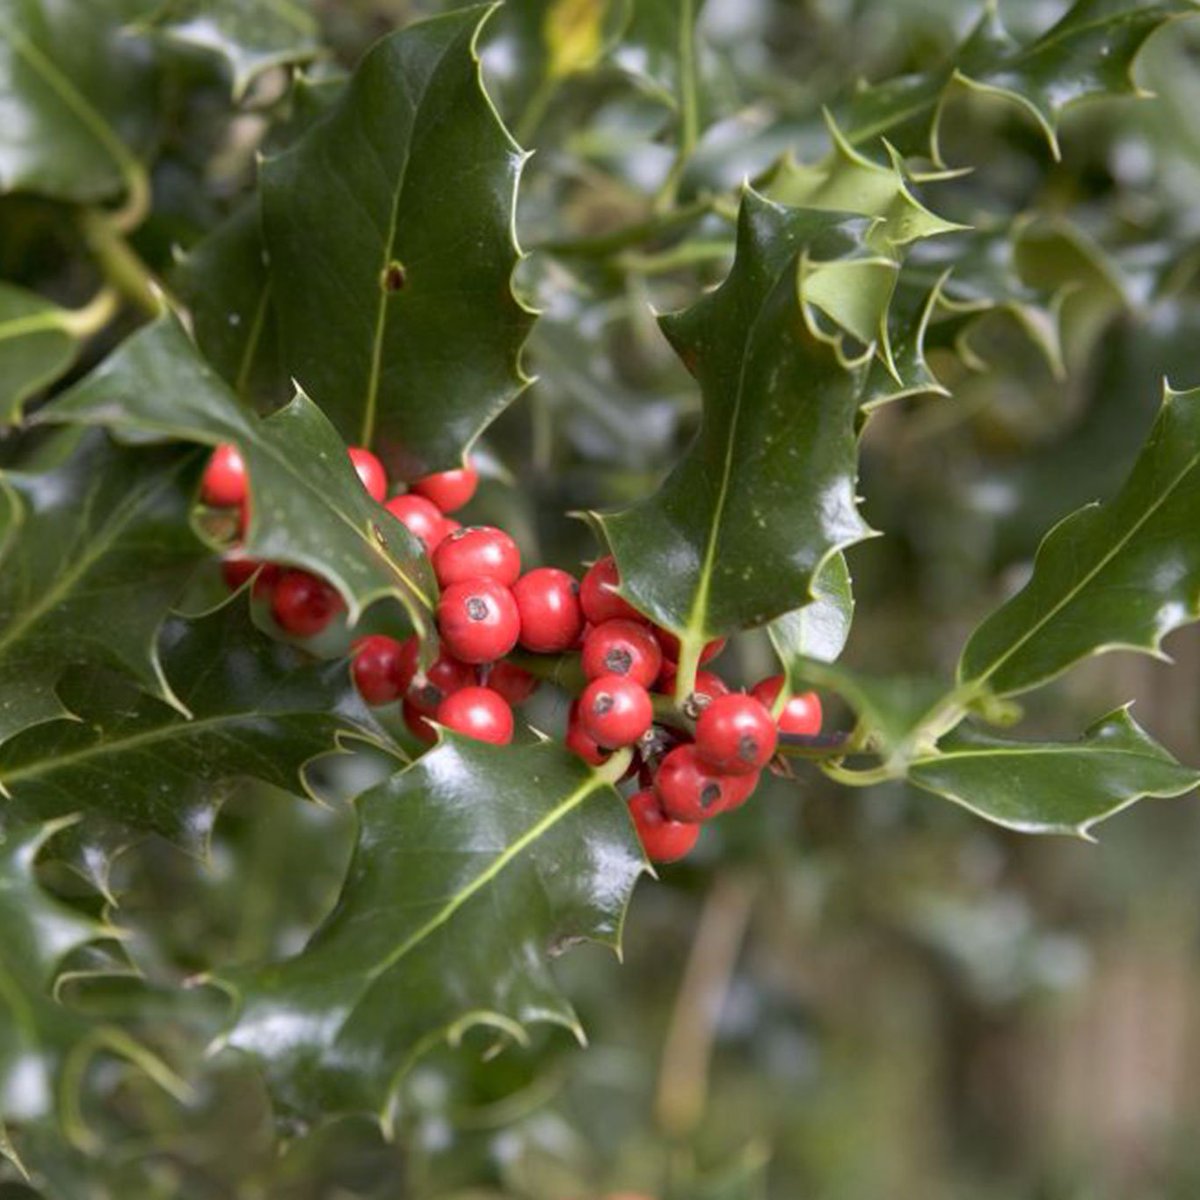 Winter Wonder Guided Walk 10/12 1pm - 4pm Join us for a walk with your family and/or friends to admire ivy, holly, red berries and robins on our annual winter walk. Free: tickettailor.com/events/thefrie…?